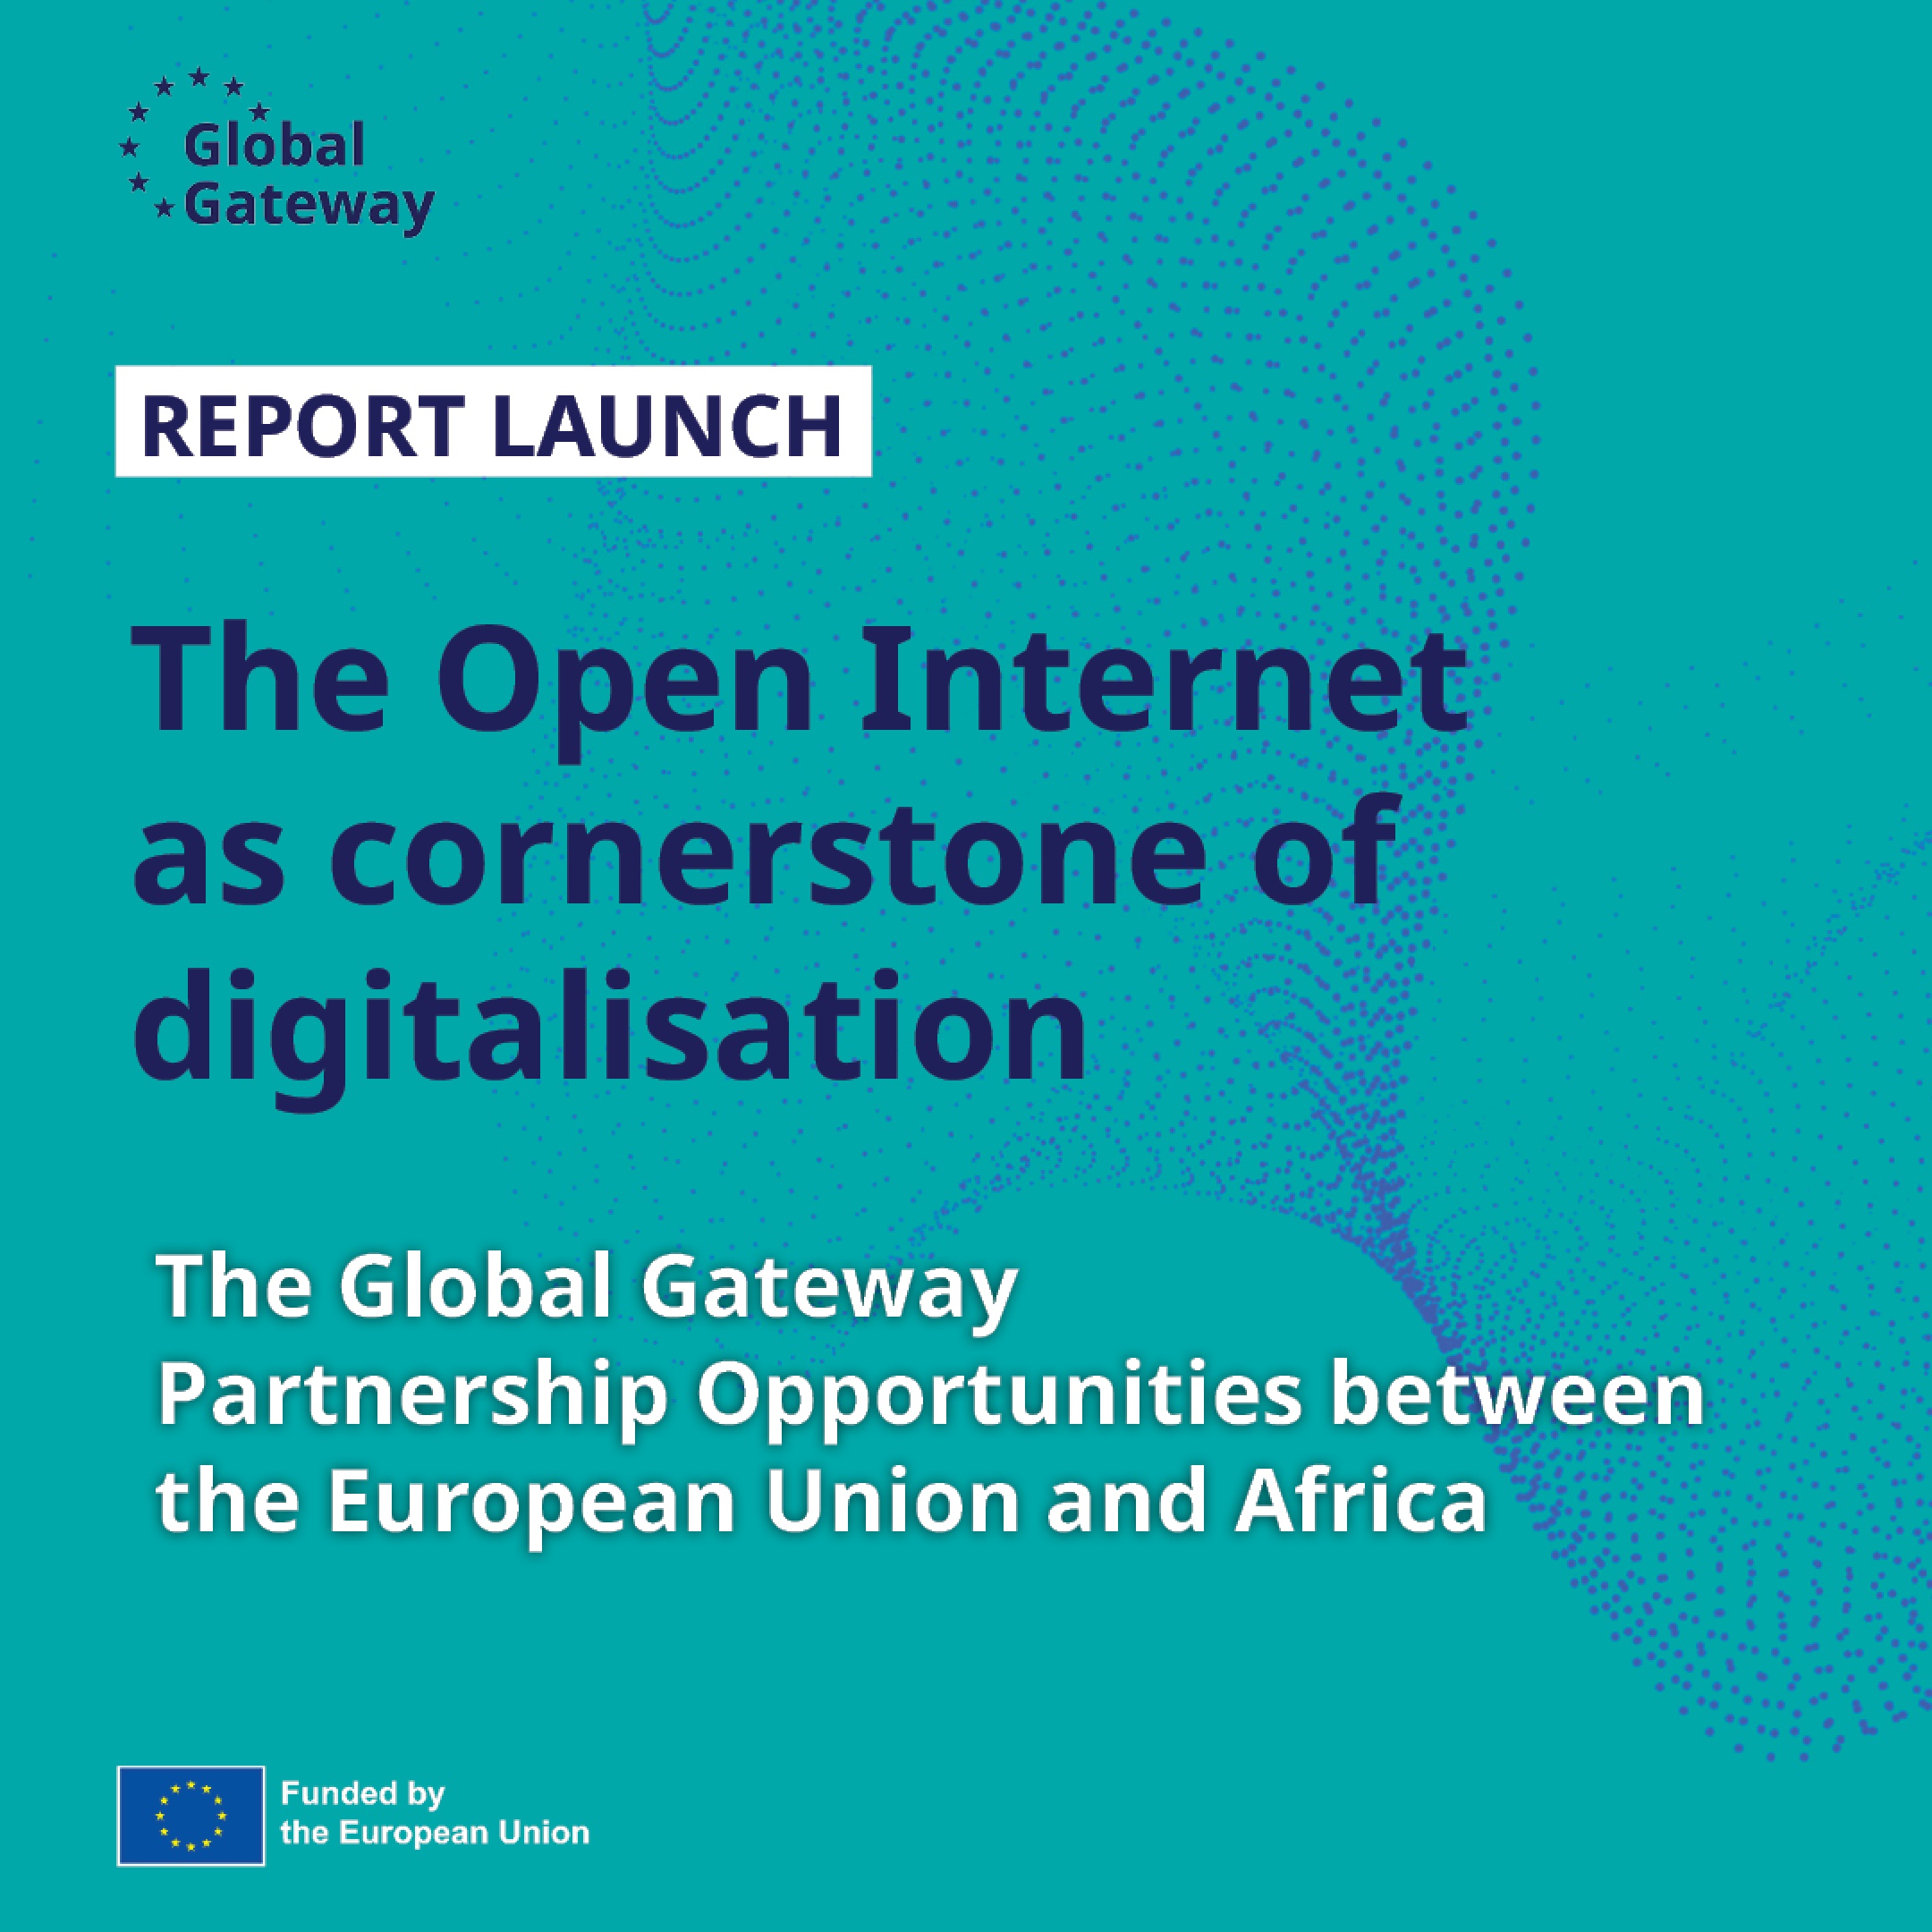 Four new reports released on Open Internet approaches in Africa